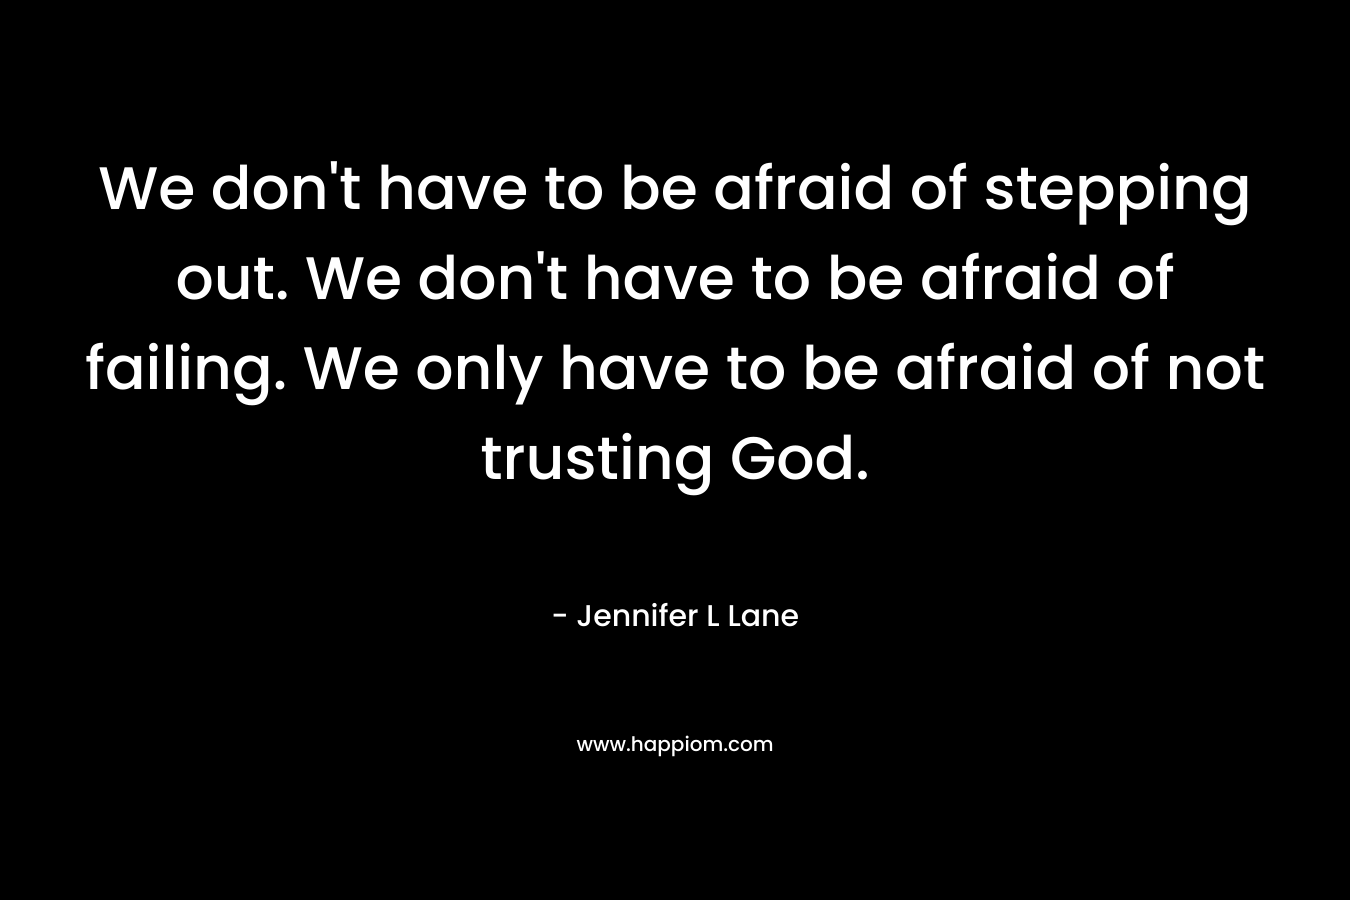 We don't have to be afraid of stepping out. We don't have to be afraid of failing. We only have to be afraid of not trusting God.